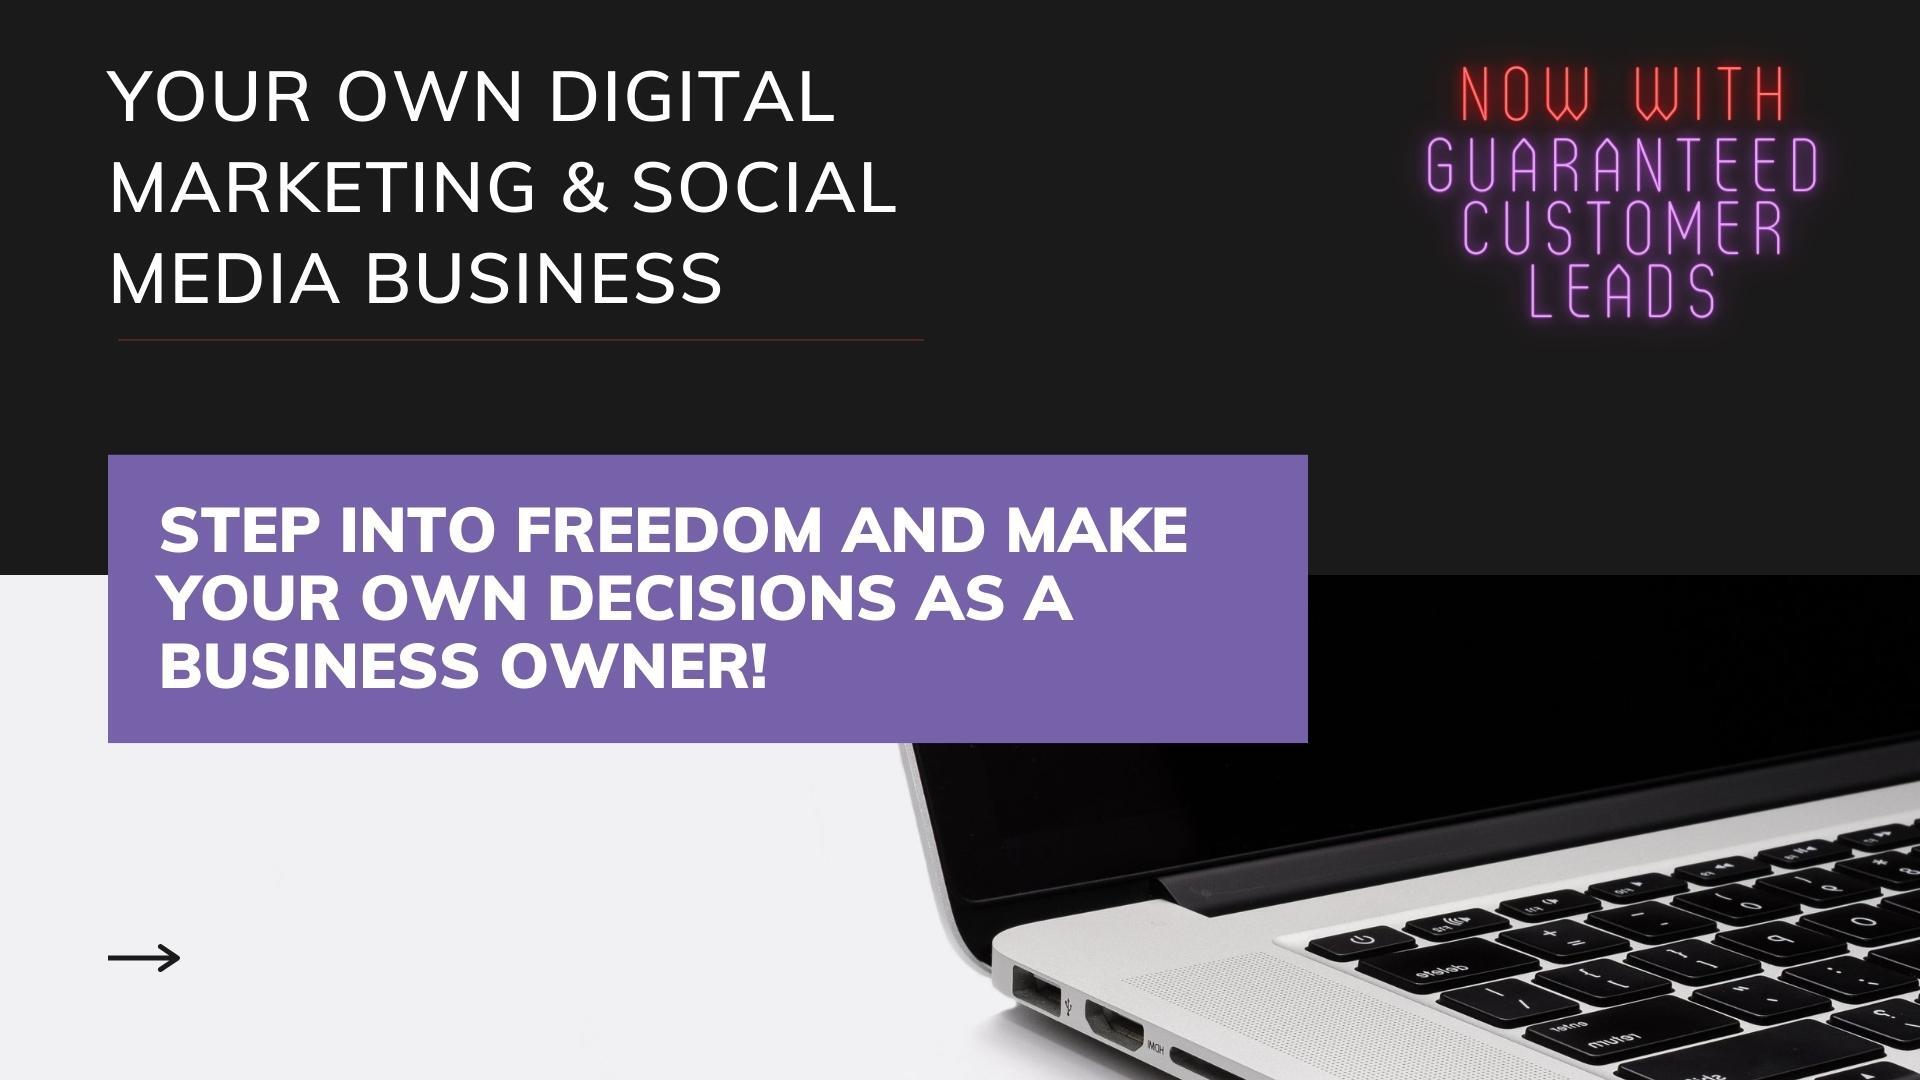 An advertisement for your own digital marketing and social media business